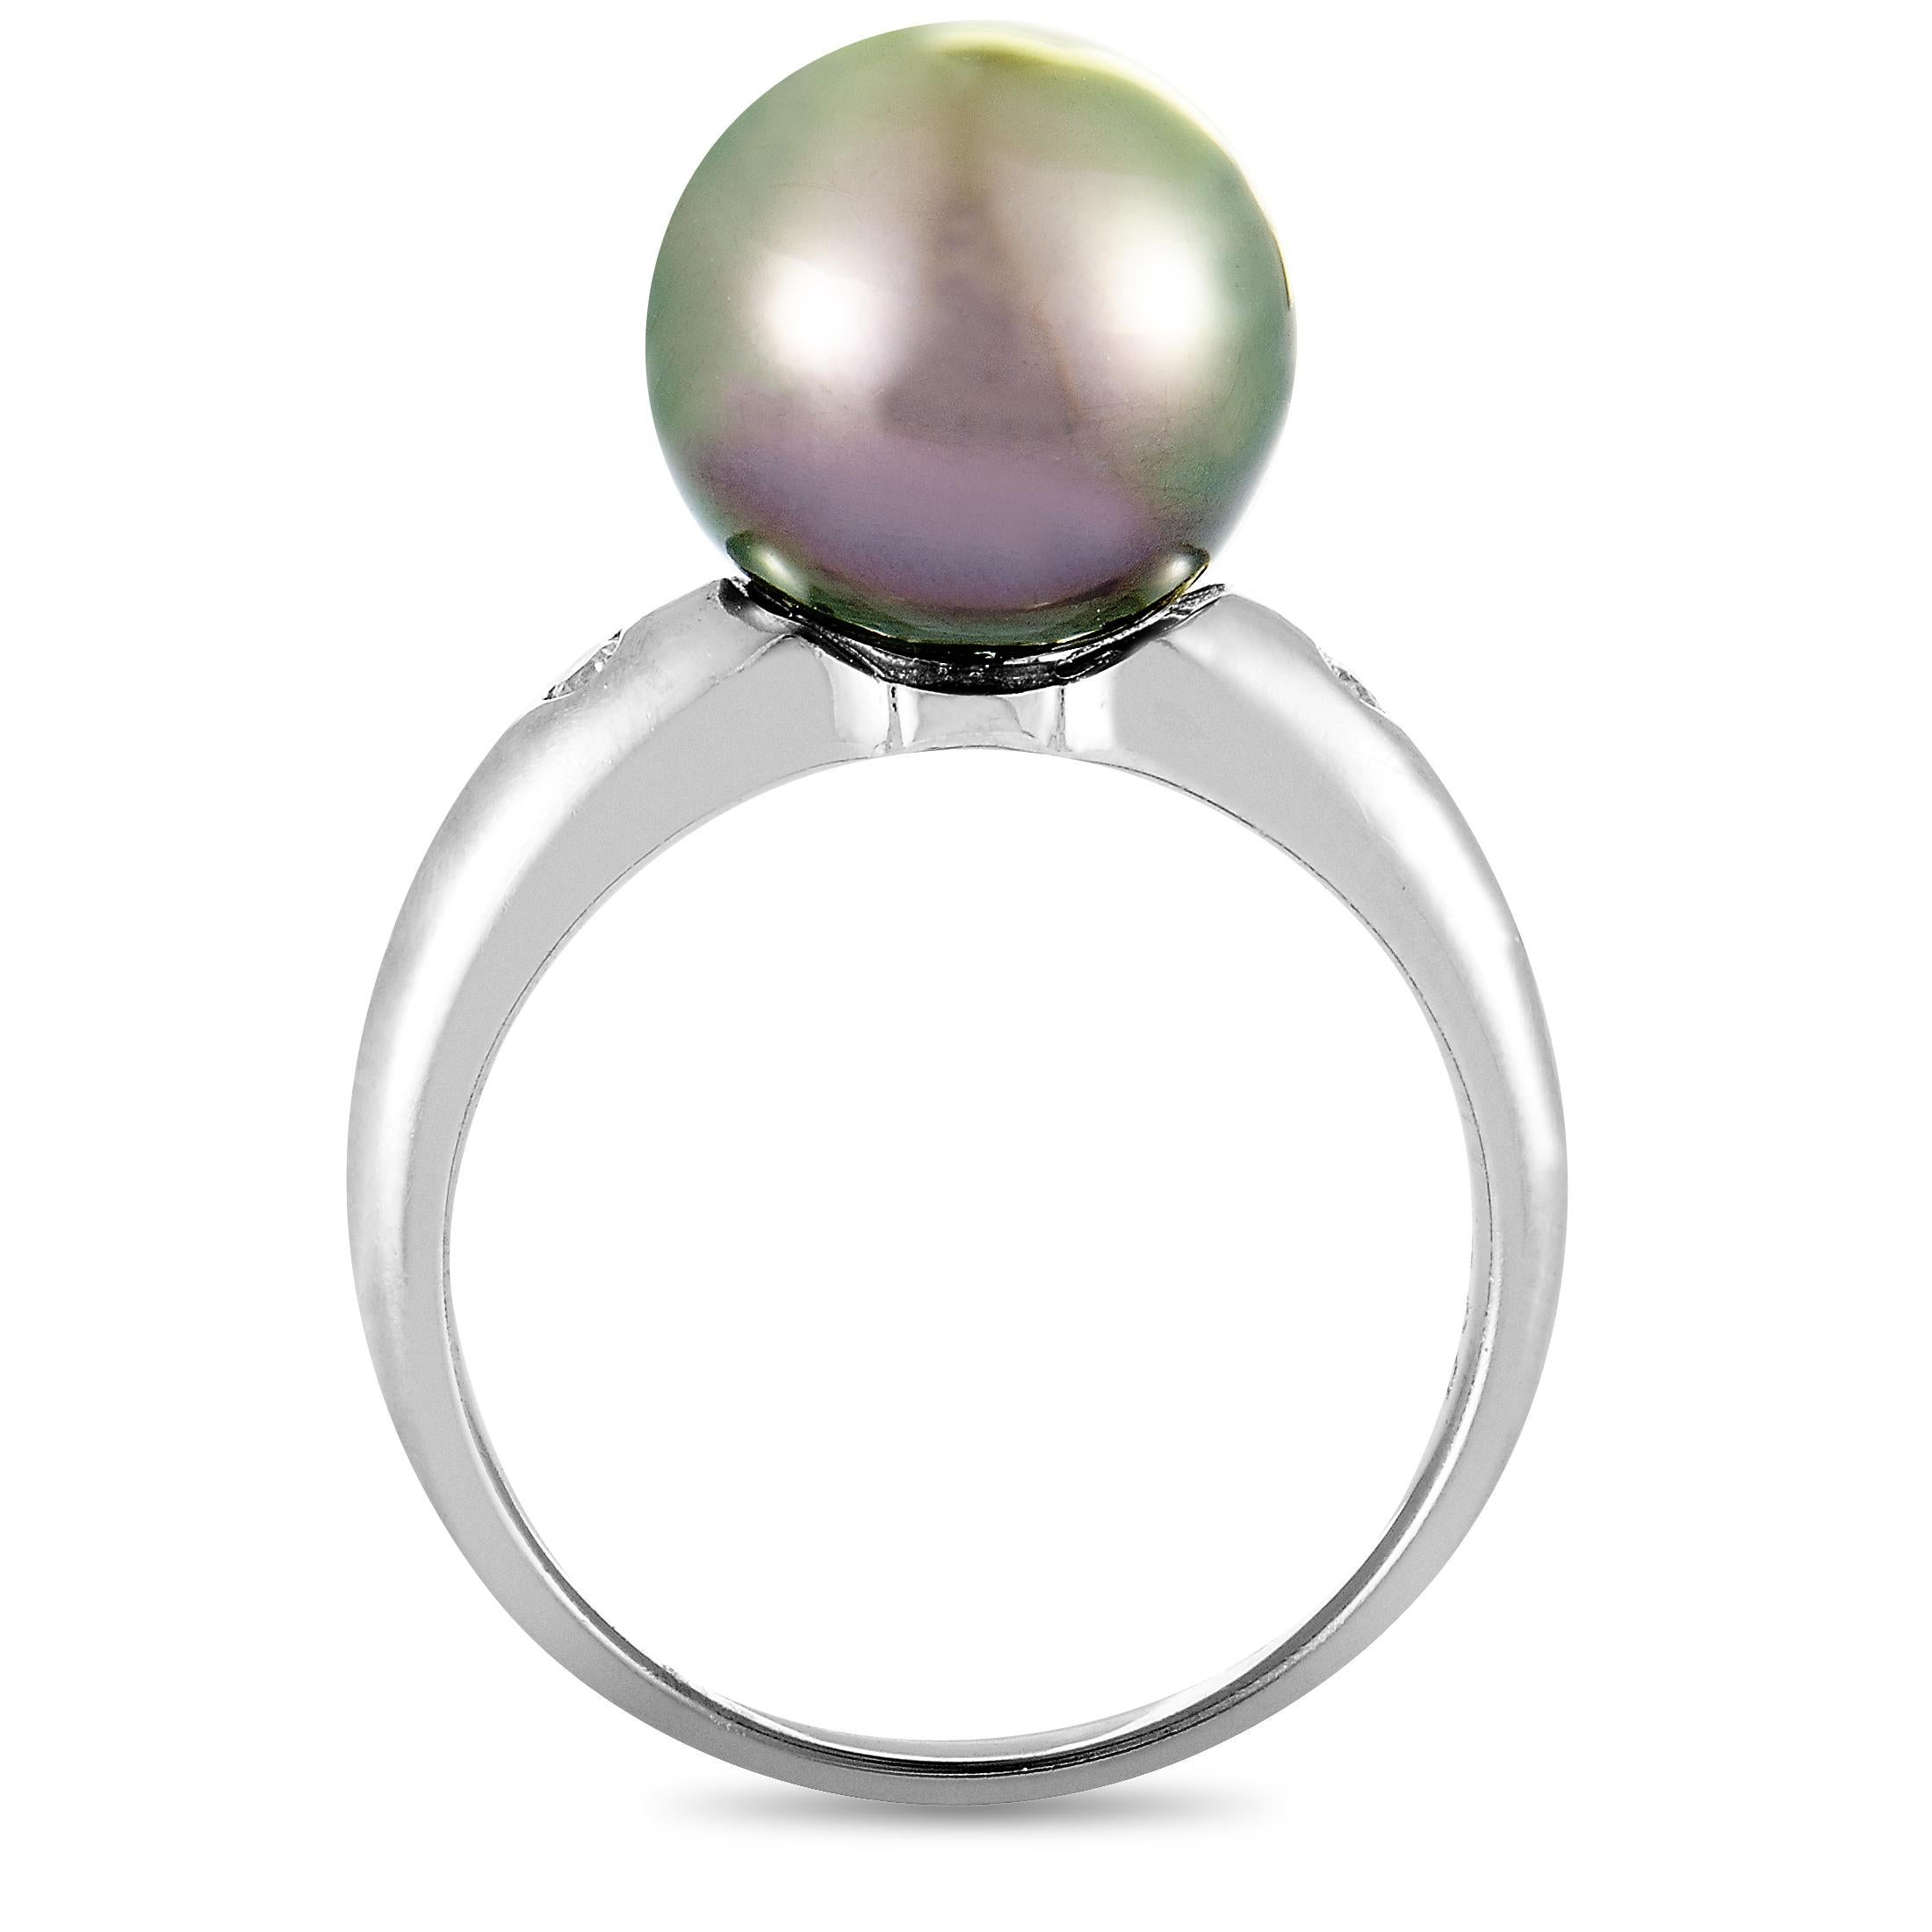 This ring is crafted from platinum and set with a 12.1 mm black pearl and with diamonds that total 0.06 carats. The ring weighs 9.1 grams, boasting band thickness of 2 mm and top height of 12 mm, while top dimensions measure 15 by 12 mm.

Offered